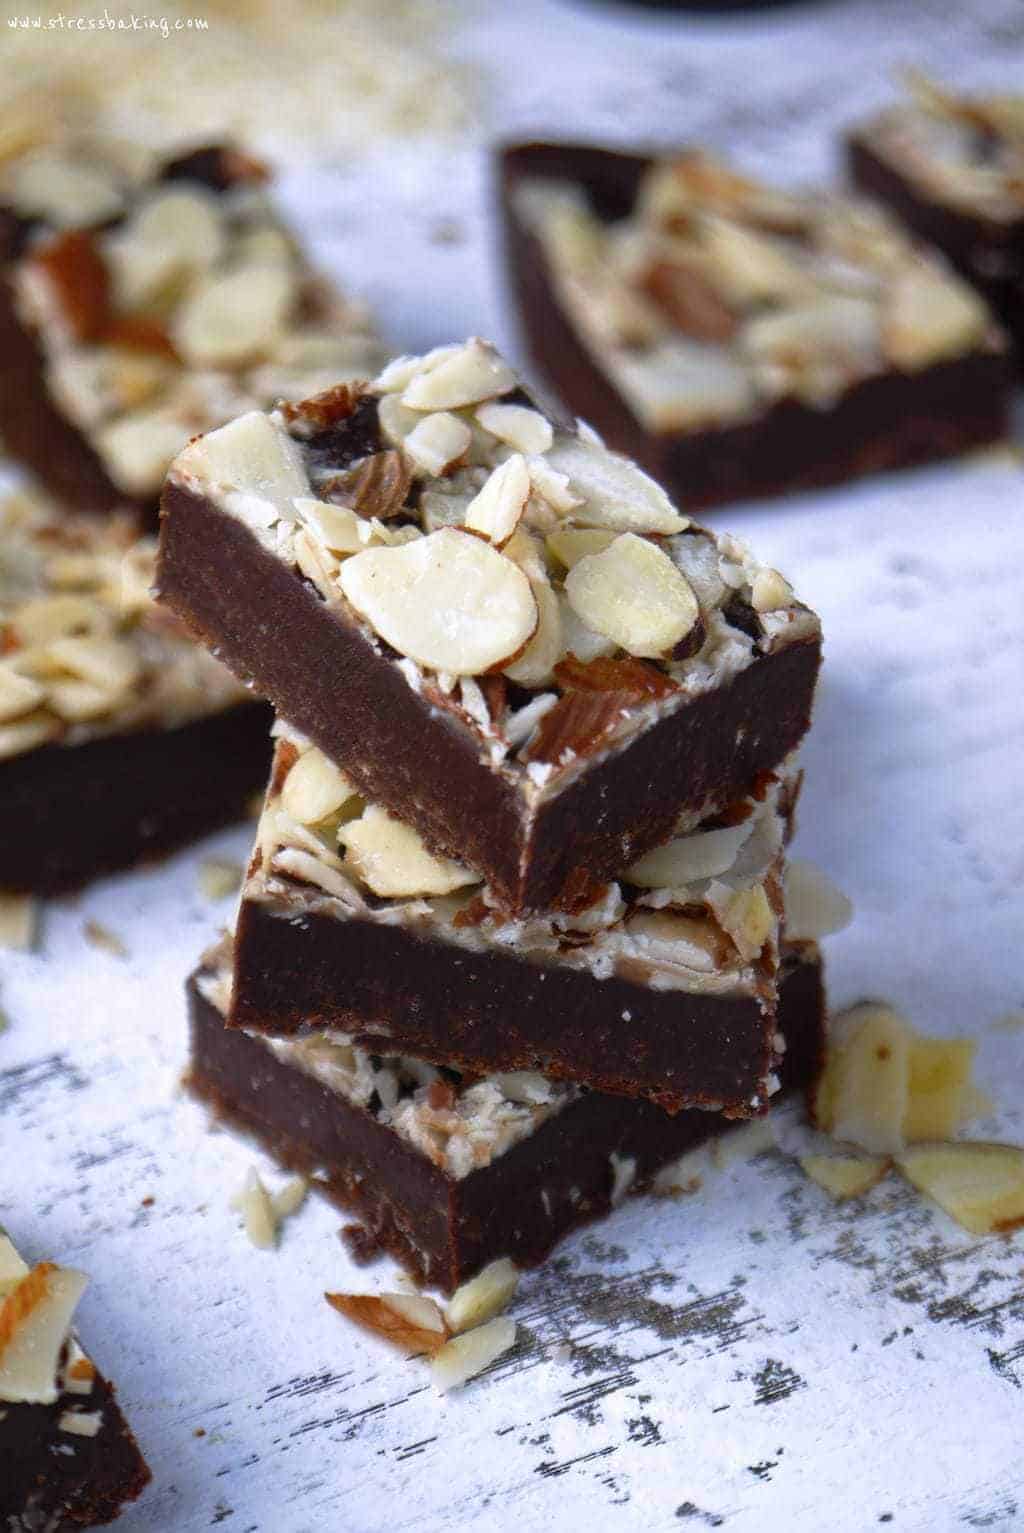 Chocolate fudge stacked on a distressed white surface topped with thinly sliced almonds